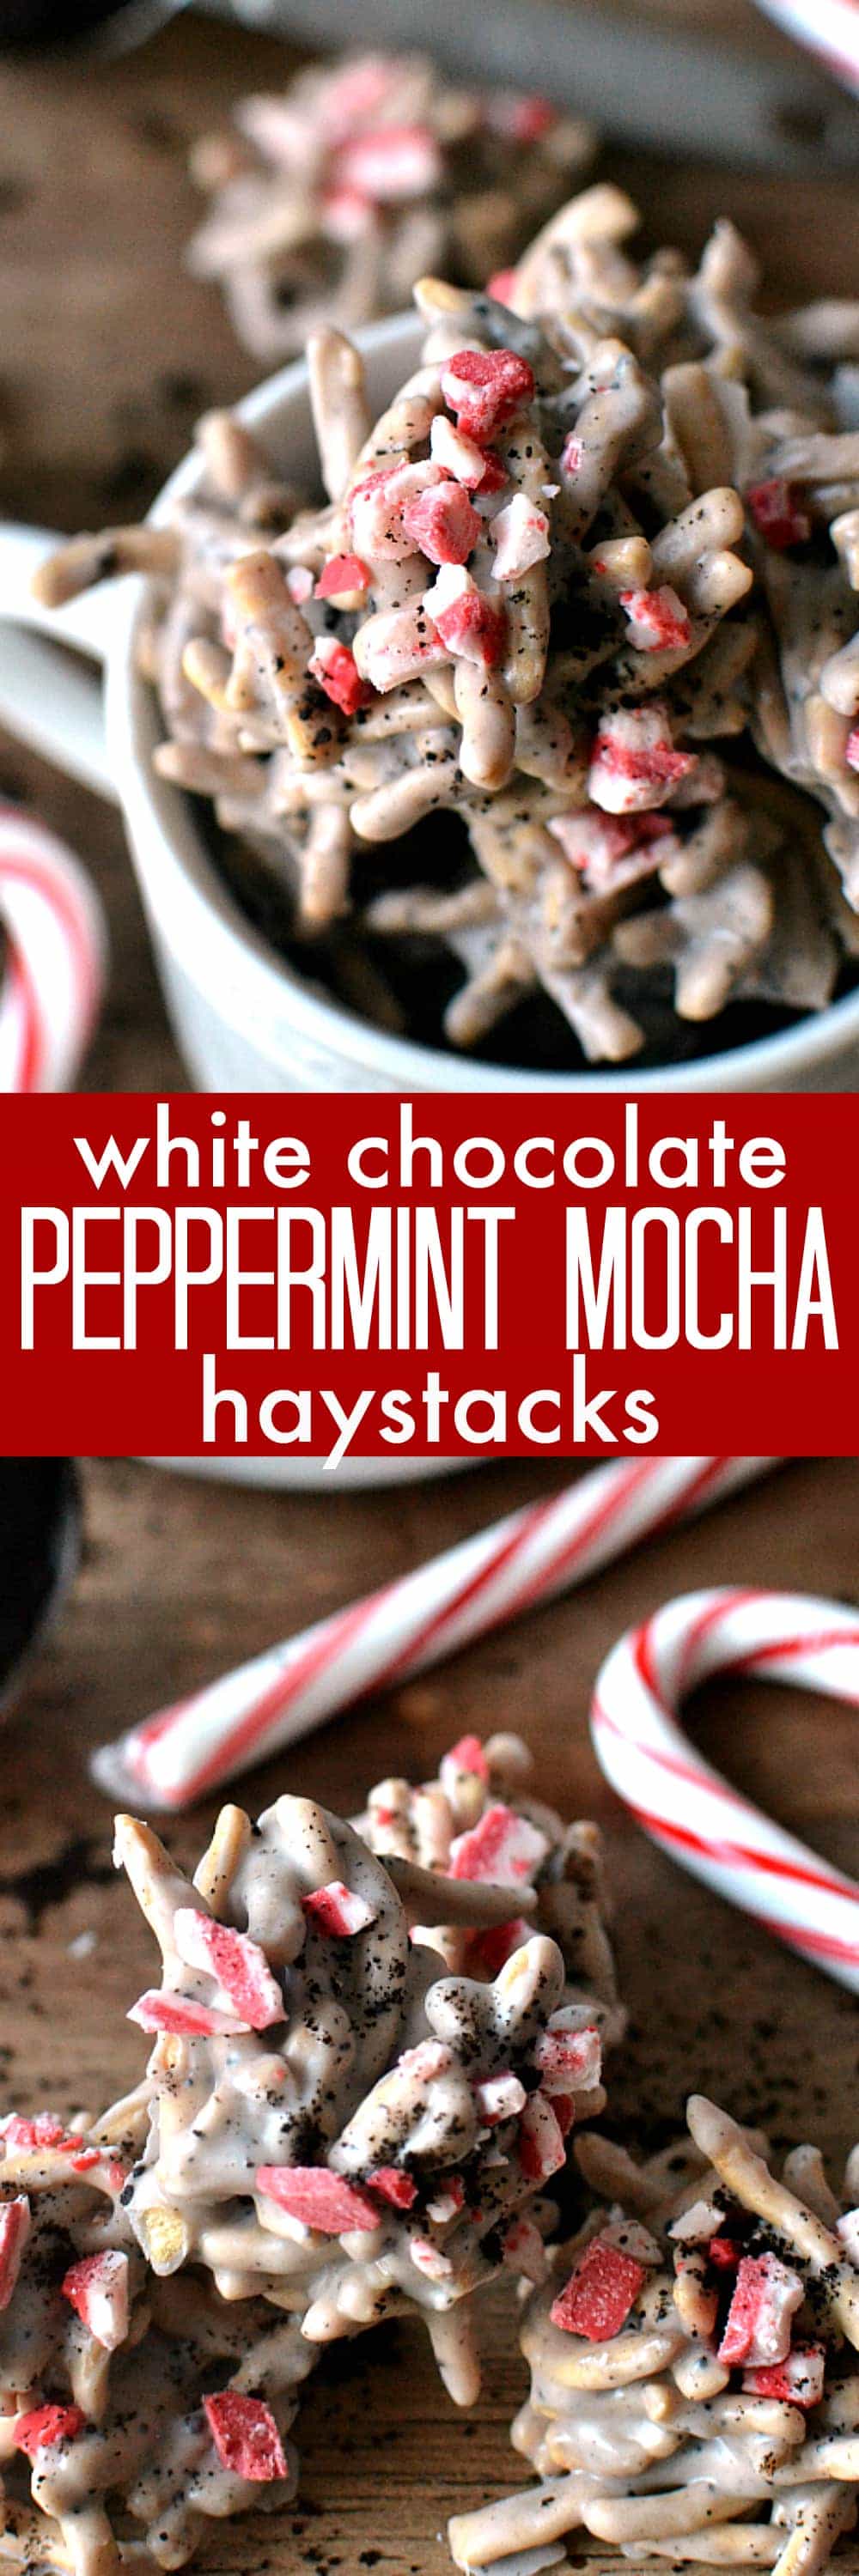 White Chocolate Peppermint Mocha Haystacks - just 4 delicious ingredients!